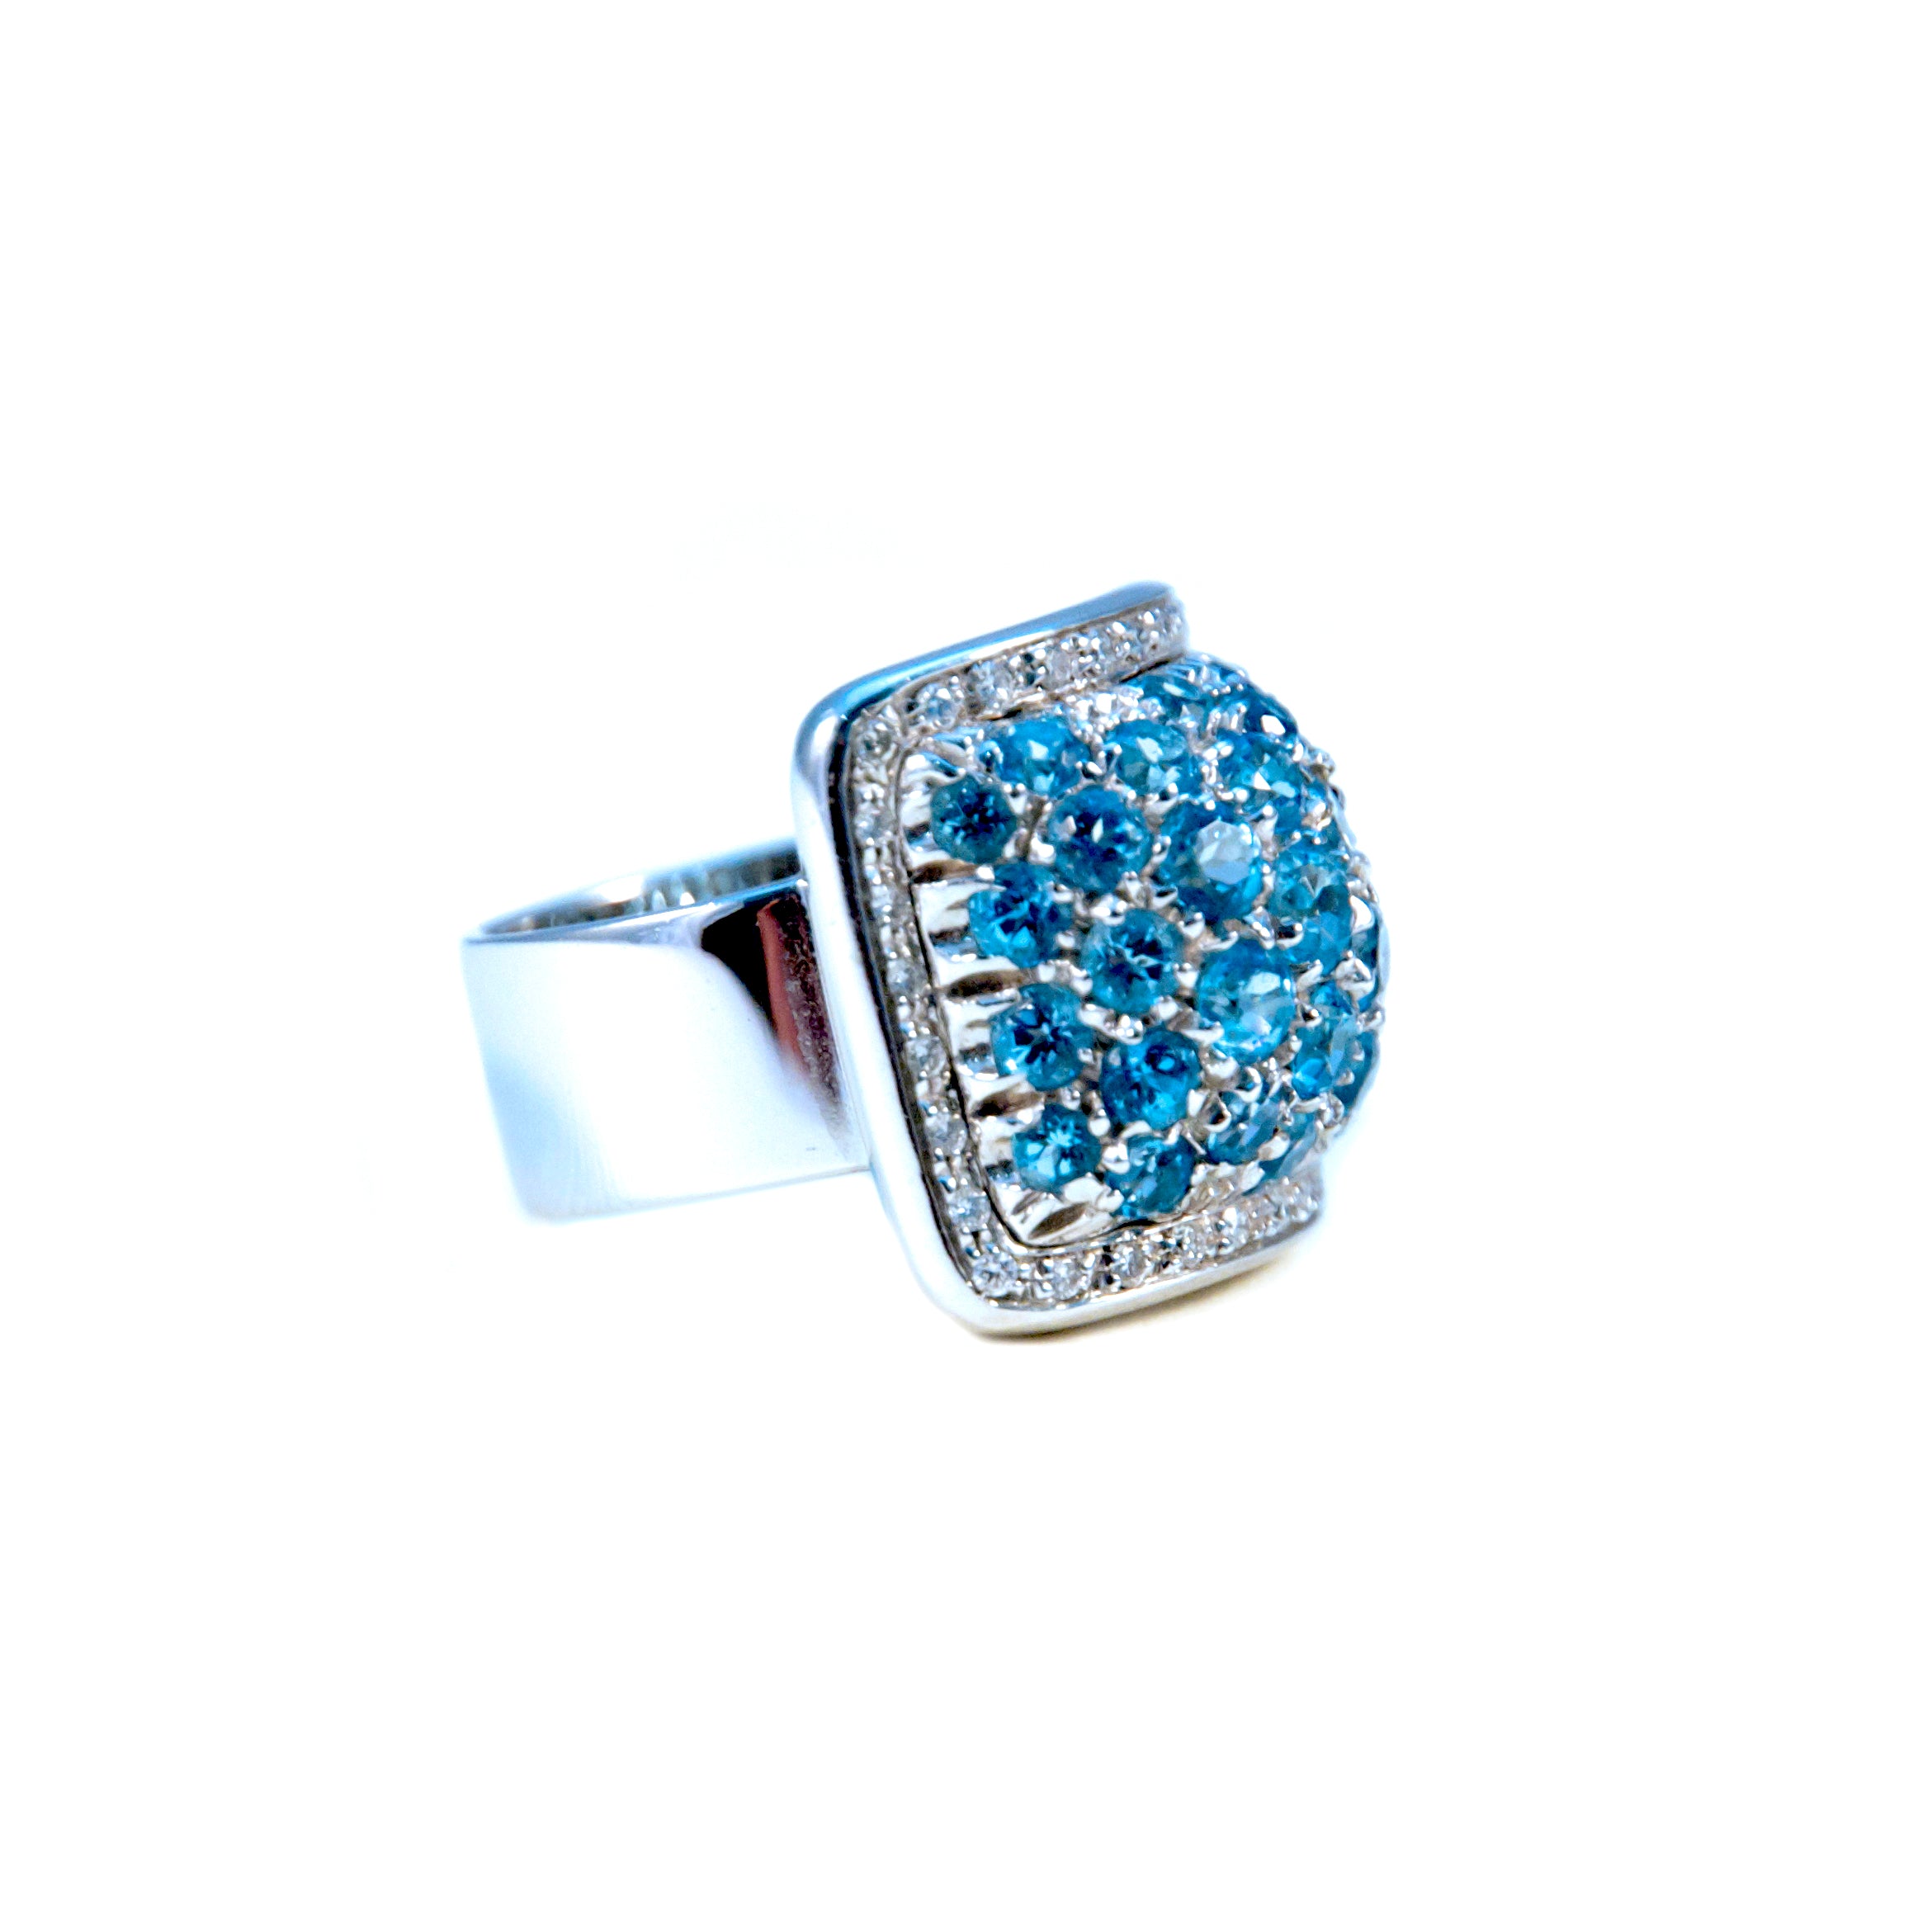 This 18k white gold Italian-made Dome style ring from the Pascale Bruni Collection features a 2.0 carat Blue Topaz and 1.0 carat of Round Diamonds, with a thick shank.